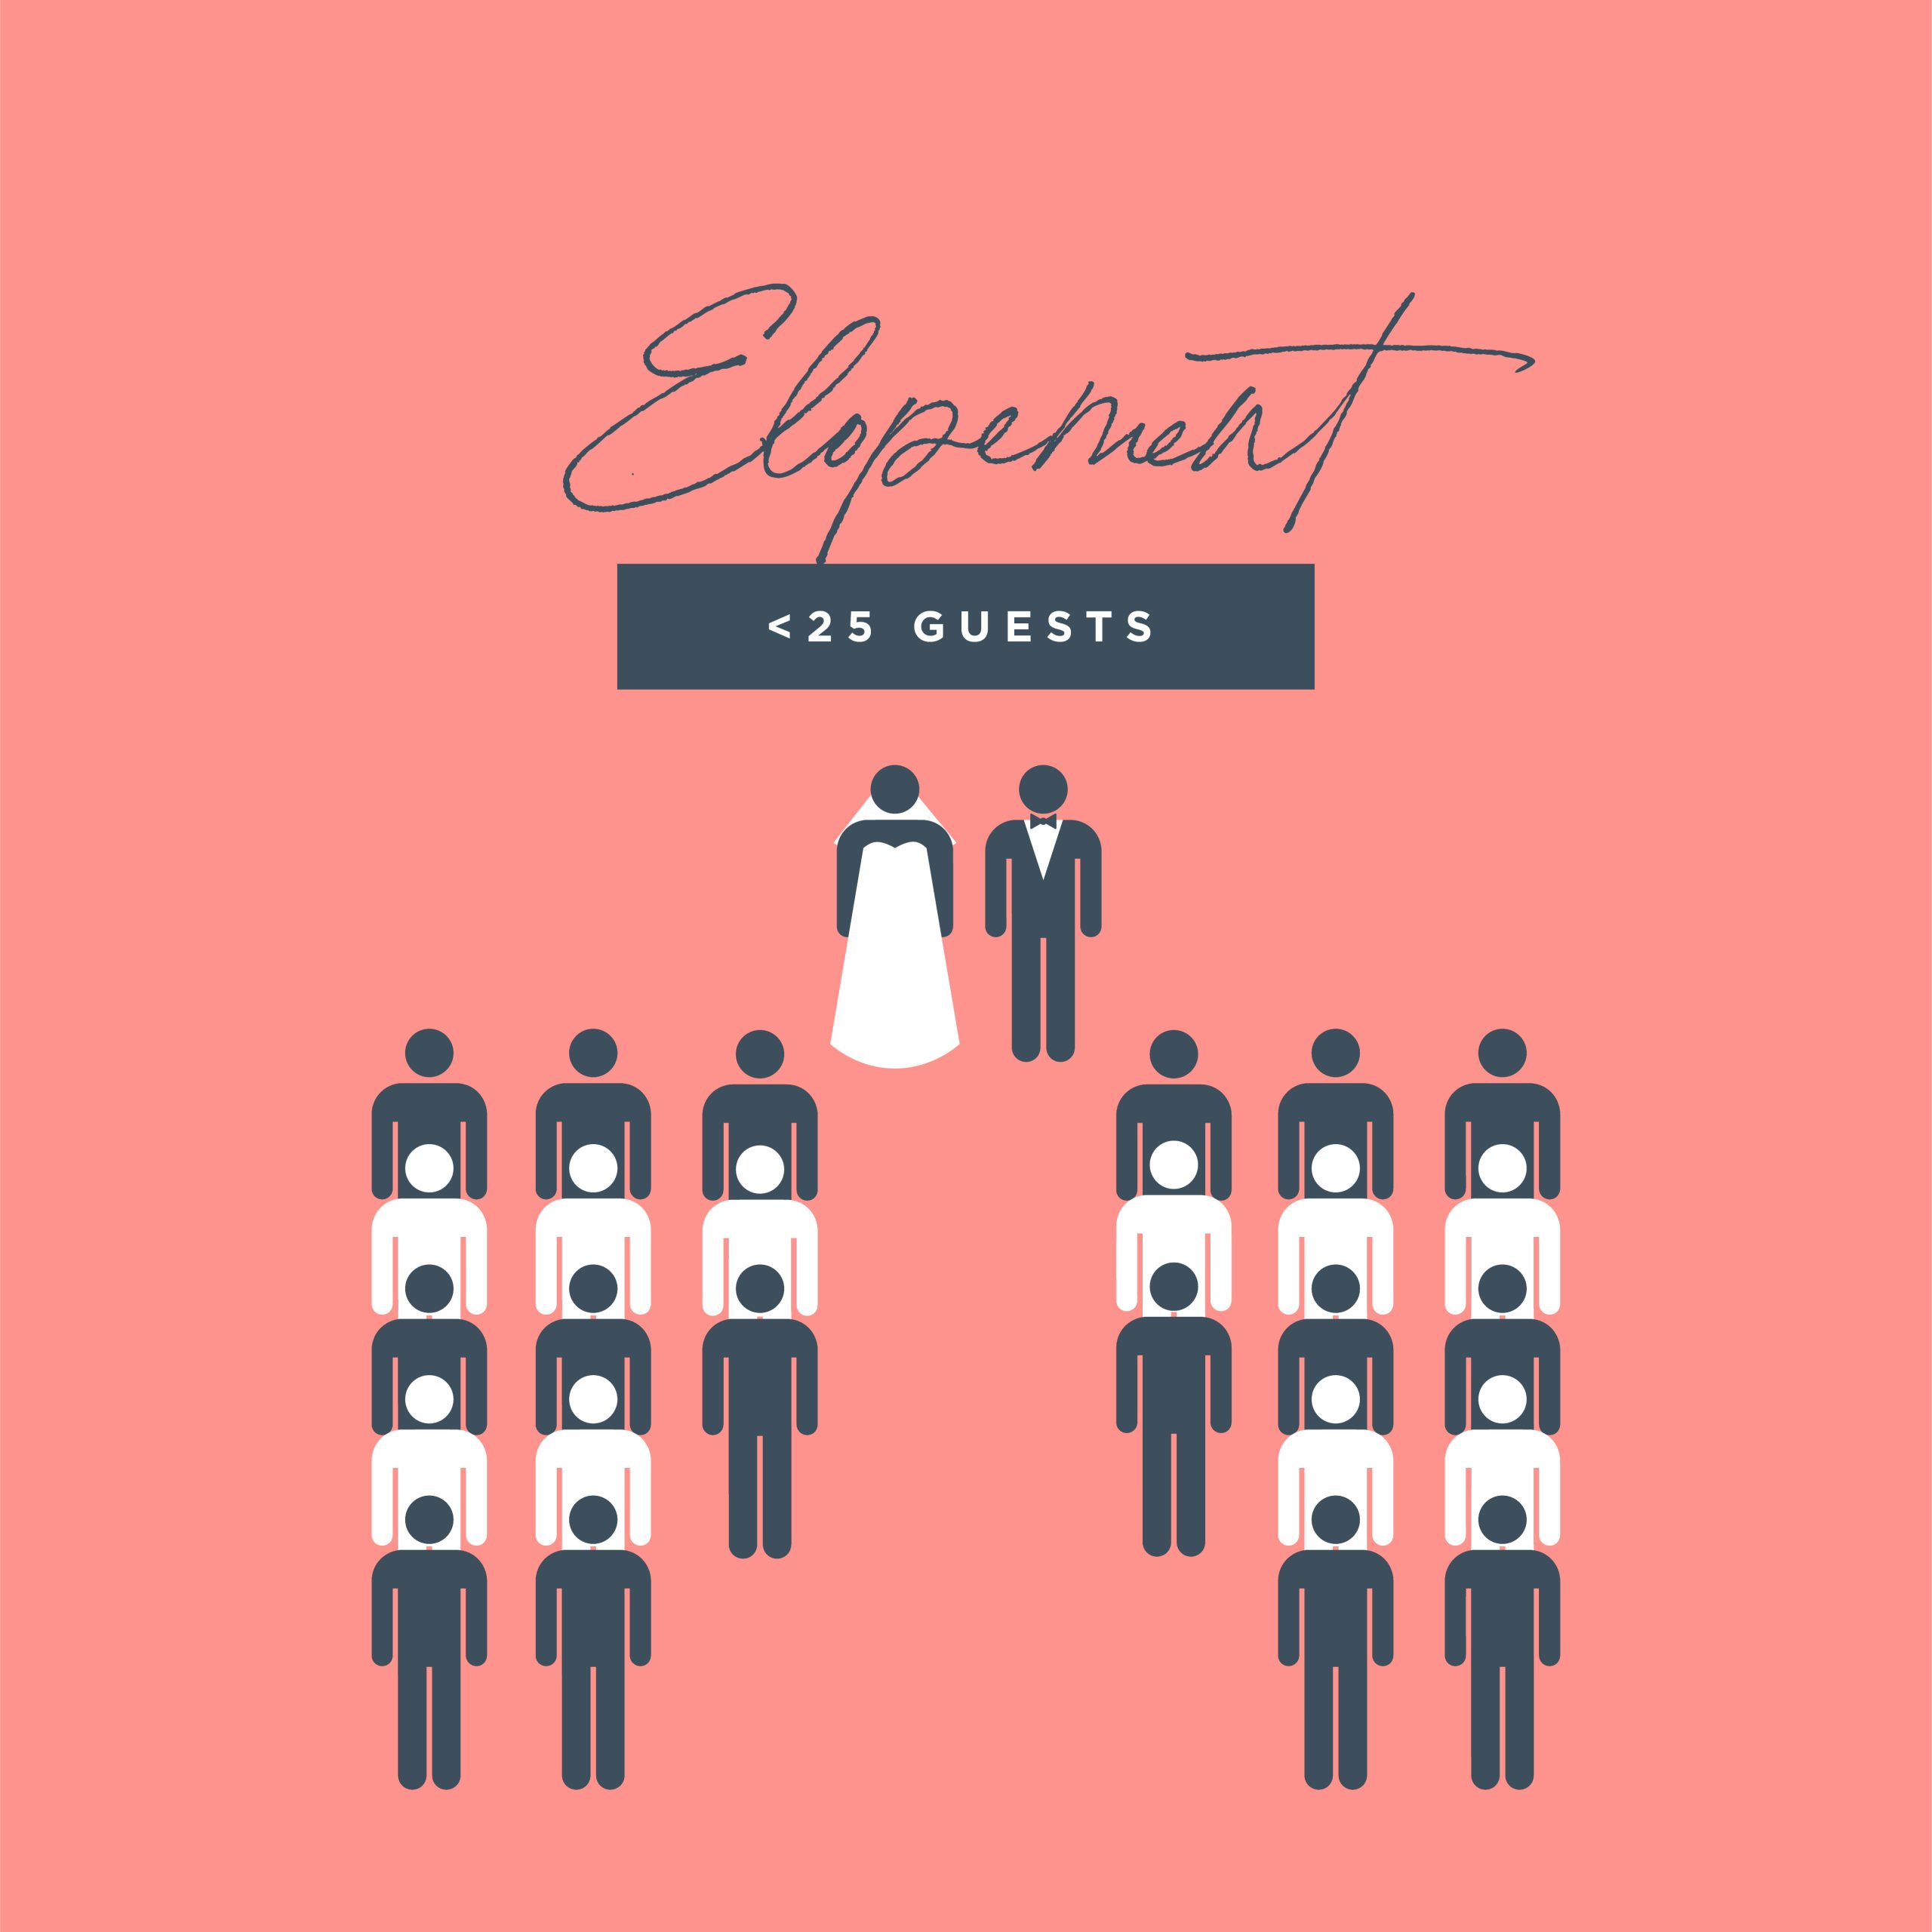 elopement guest count | wedding size terms